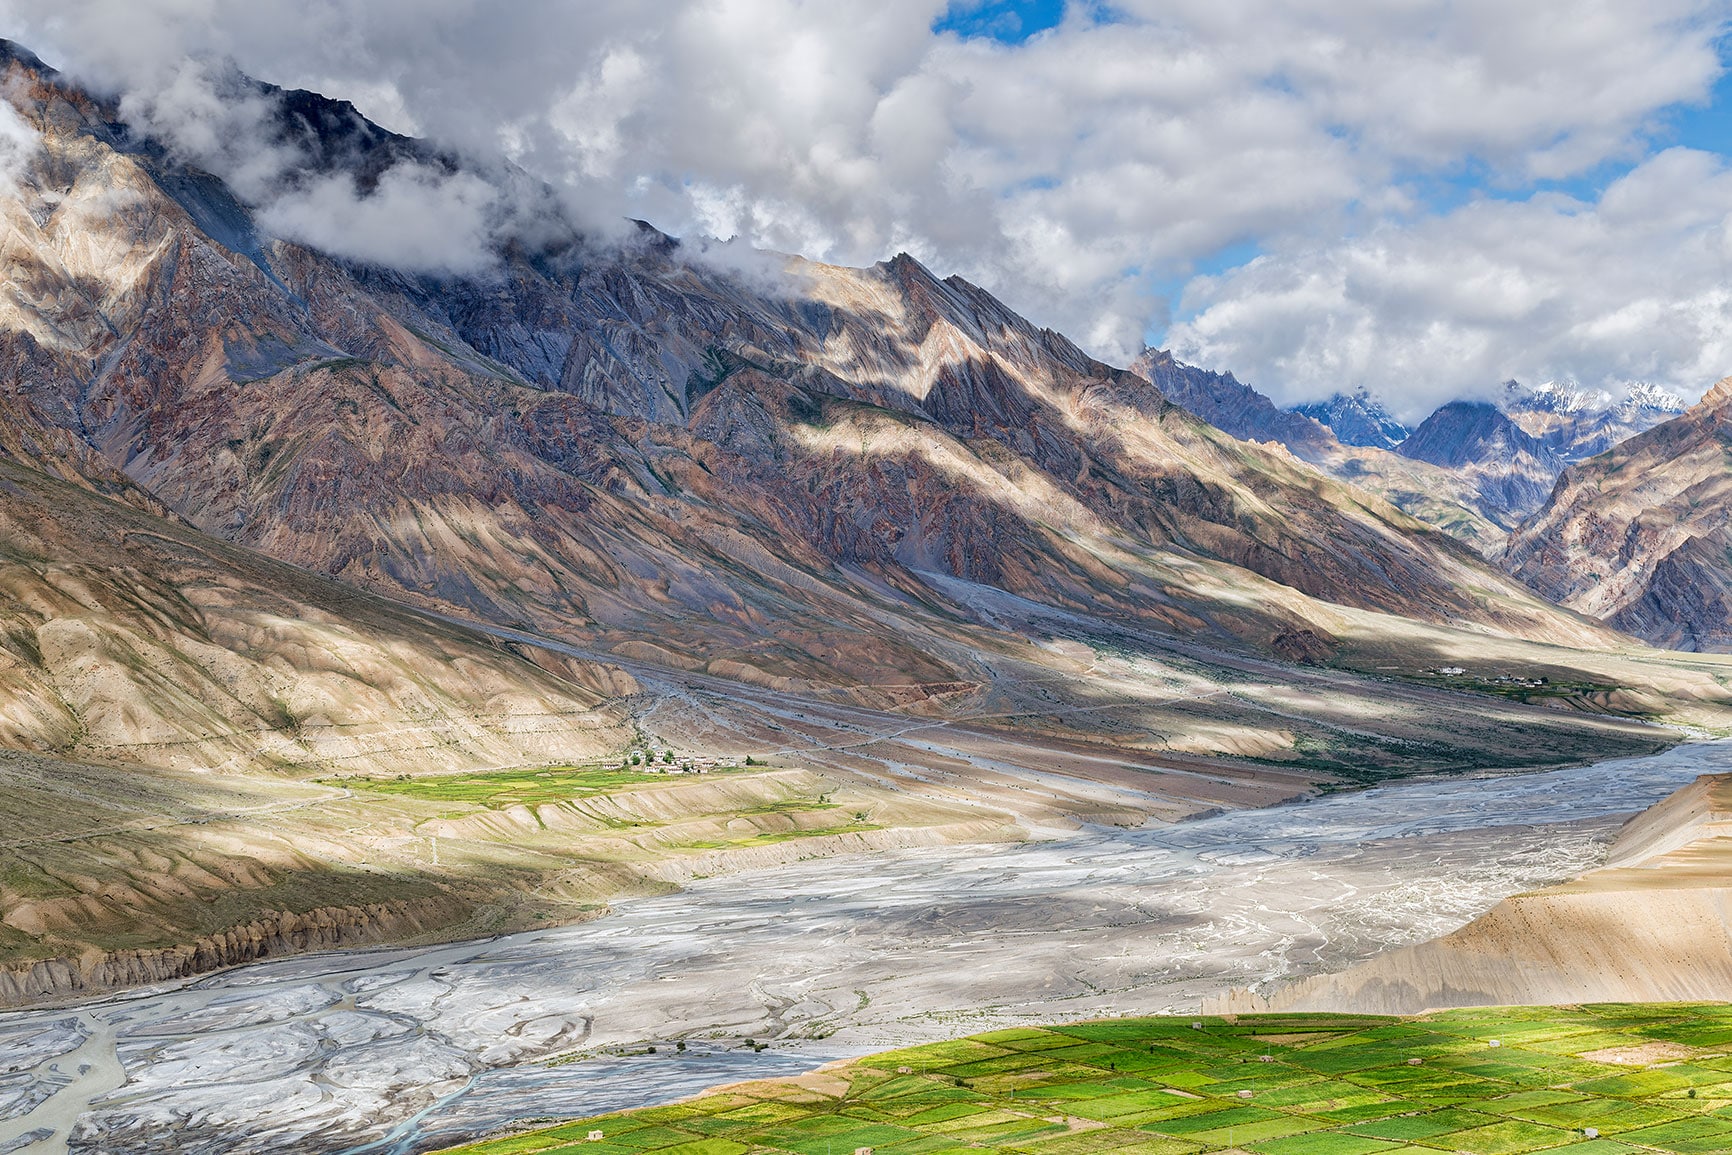 Kaza - one of the best places to travel solo in North India